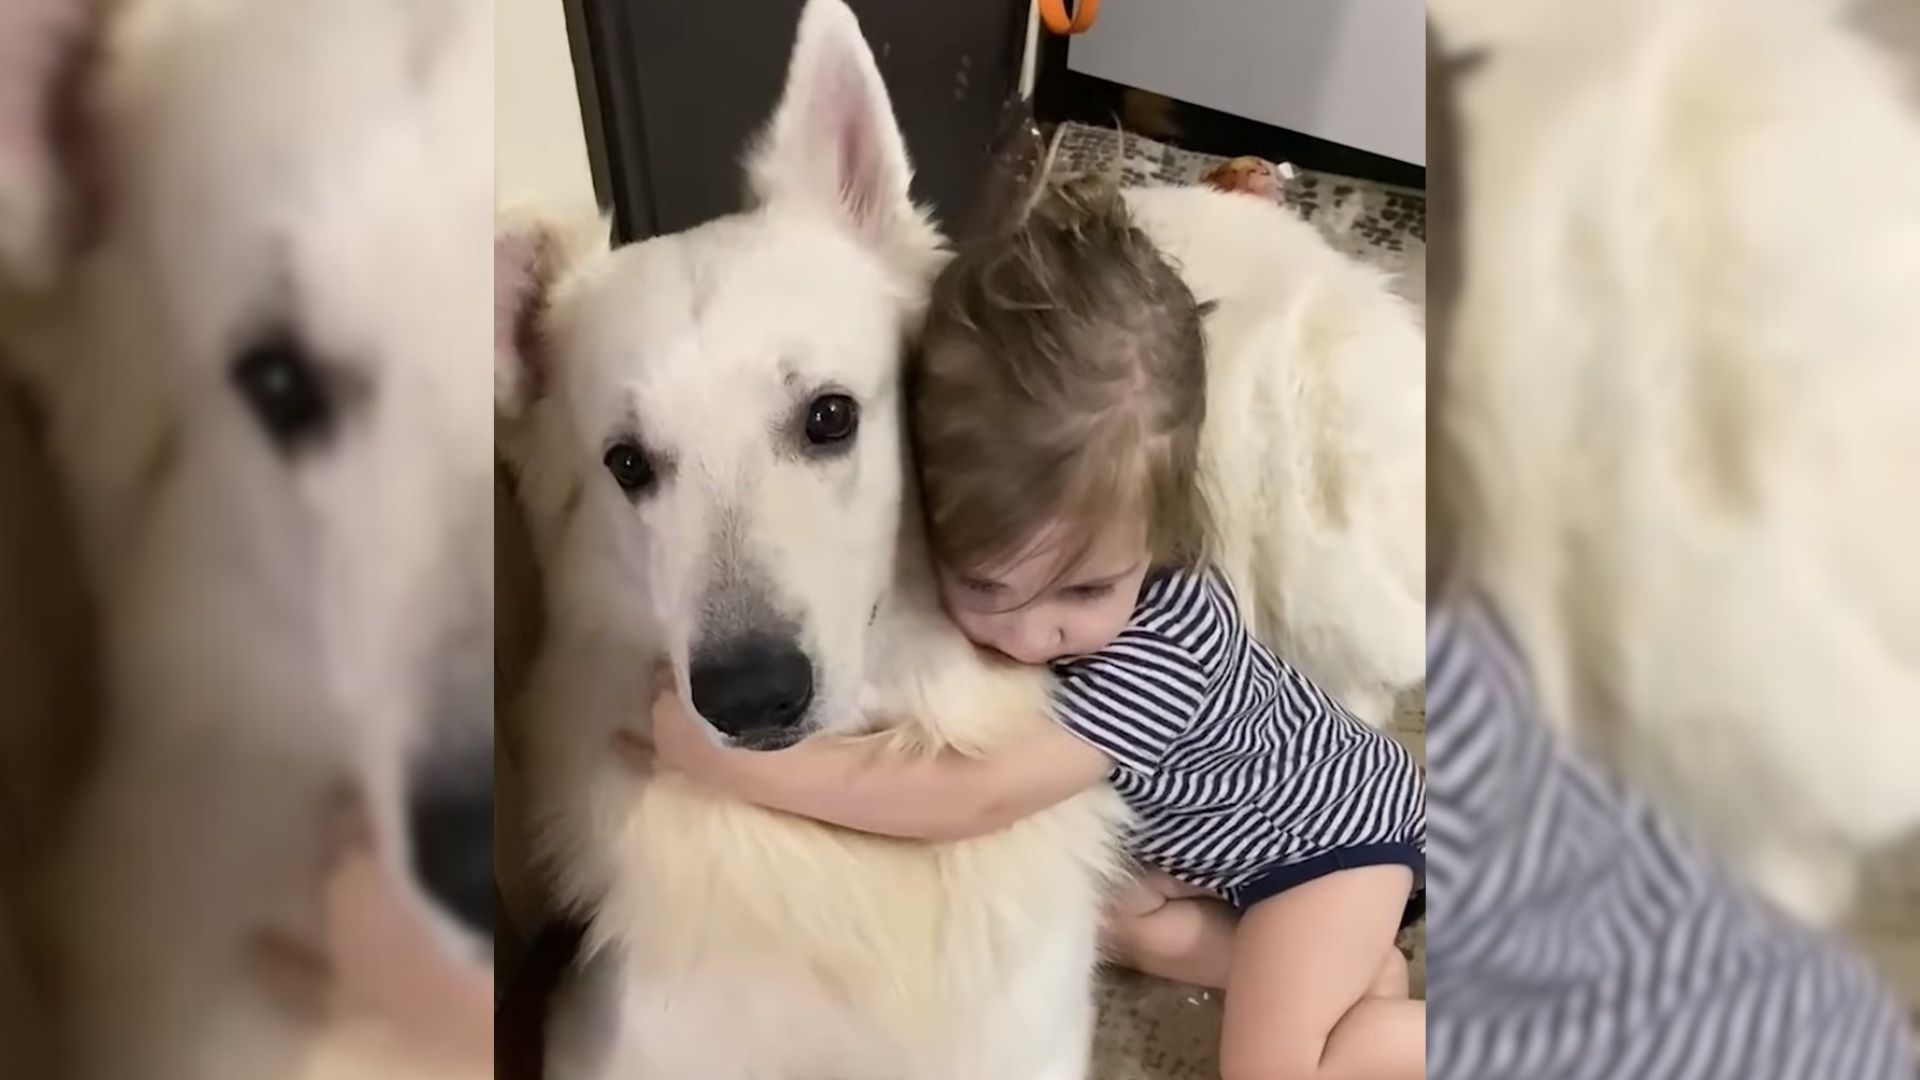 The Sweet Family Dog Is In Love With His Baby Sister From The First Day She Was Born